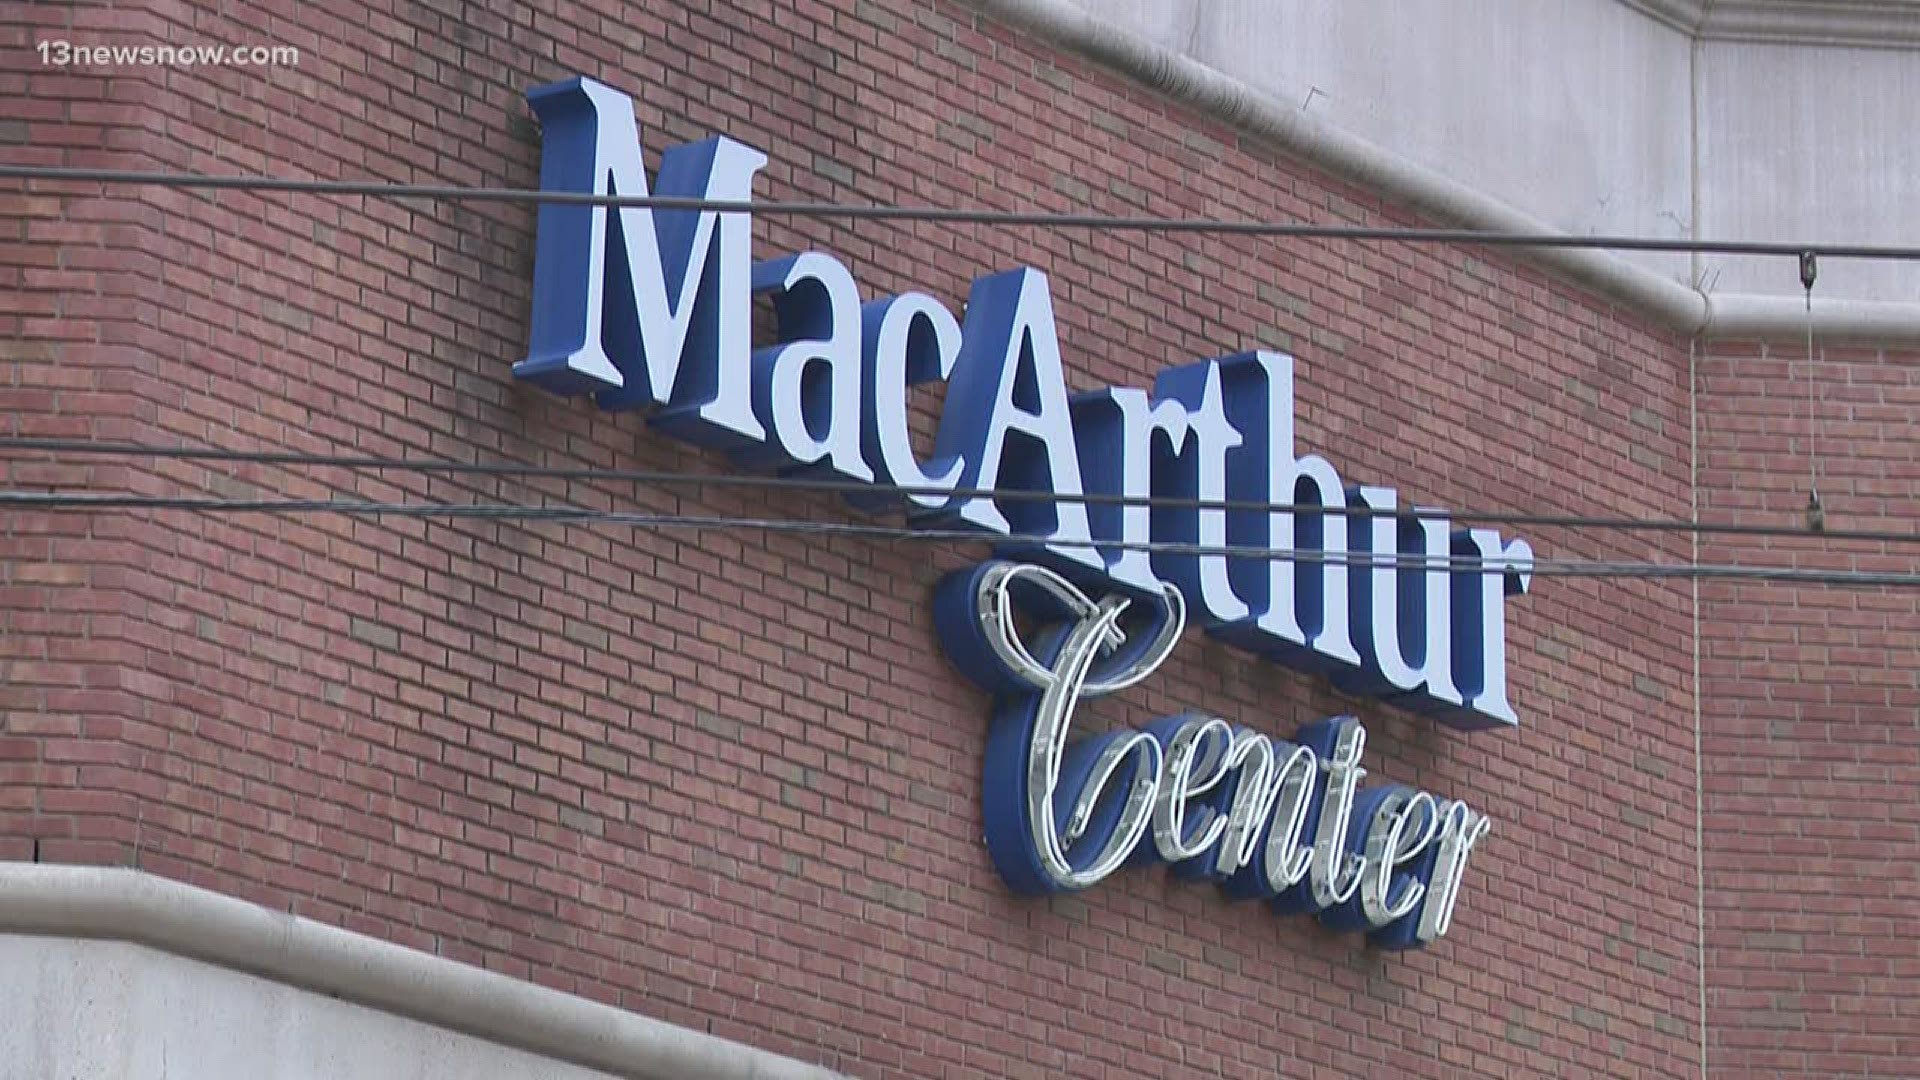 The doors of MacArthur Center will open back up to shoppers, but the inside of the mall will look and operate differently while the pandemic continues.